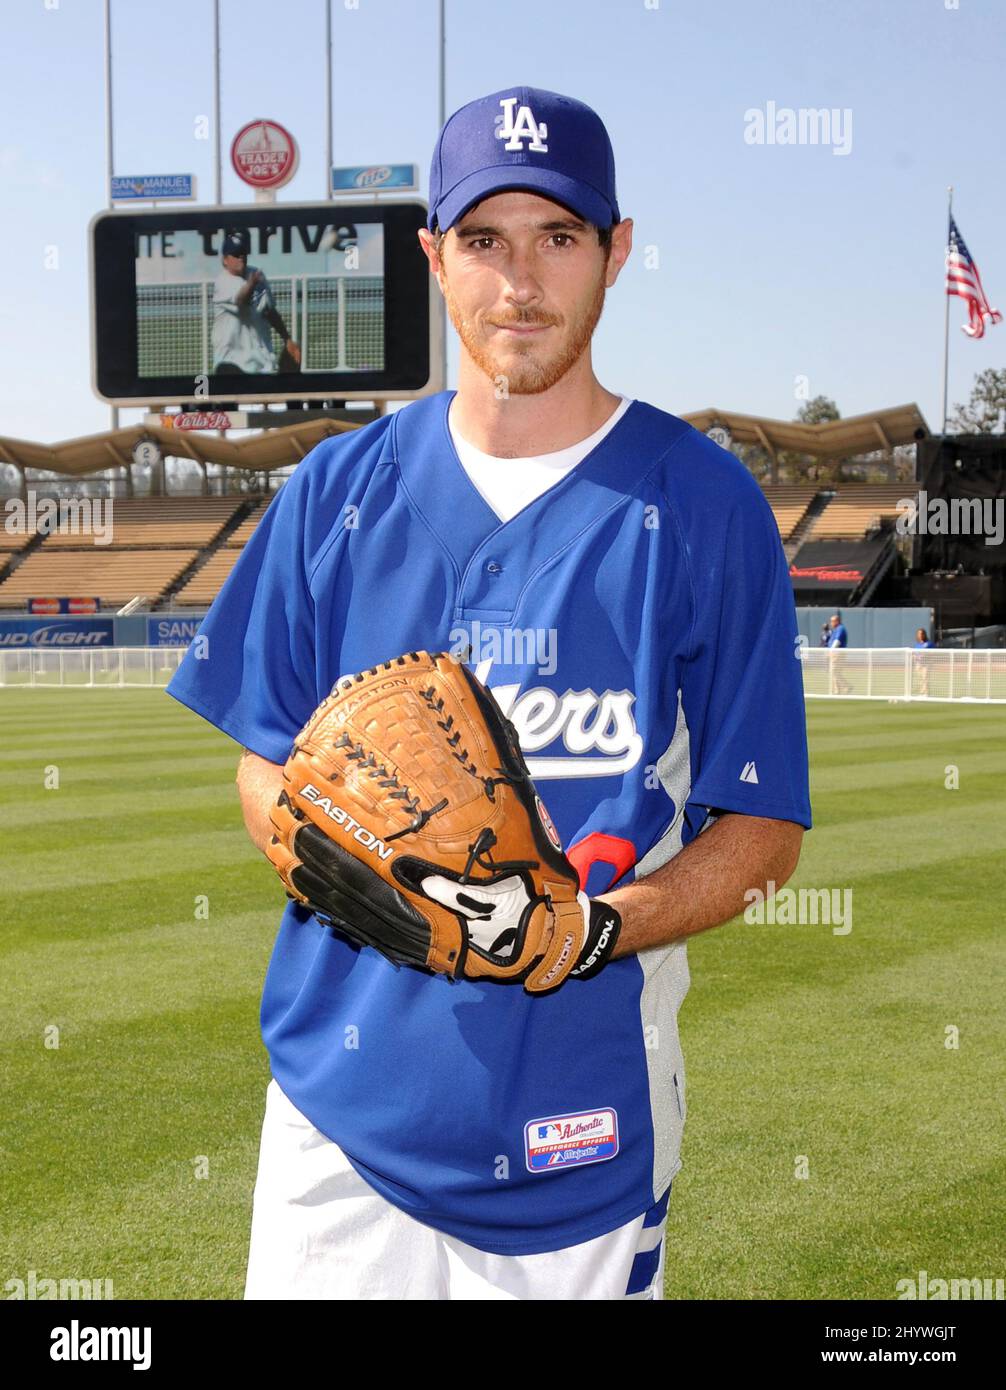 Dave Annable at the 51st Annual Hollywood Stars Game held at Dodger Stadium in Los Angeles, USA Stock Photo